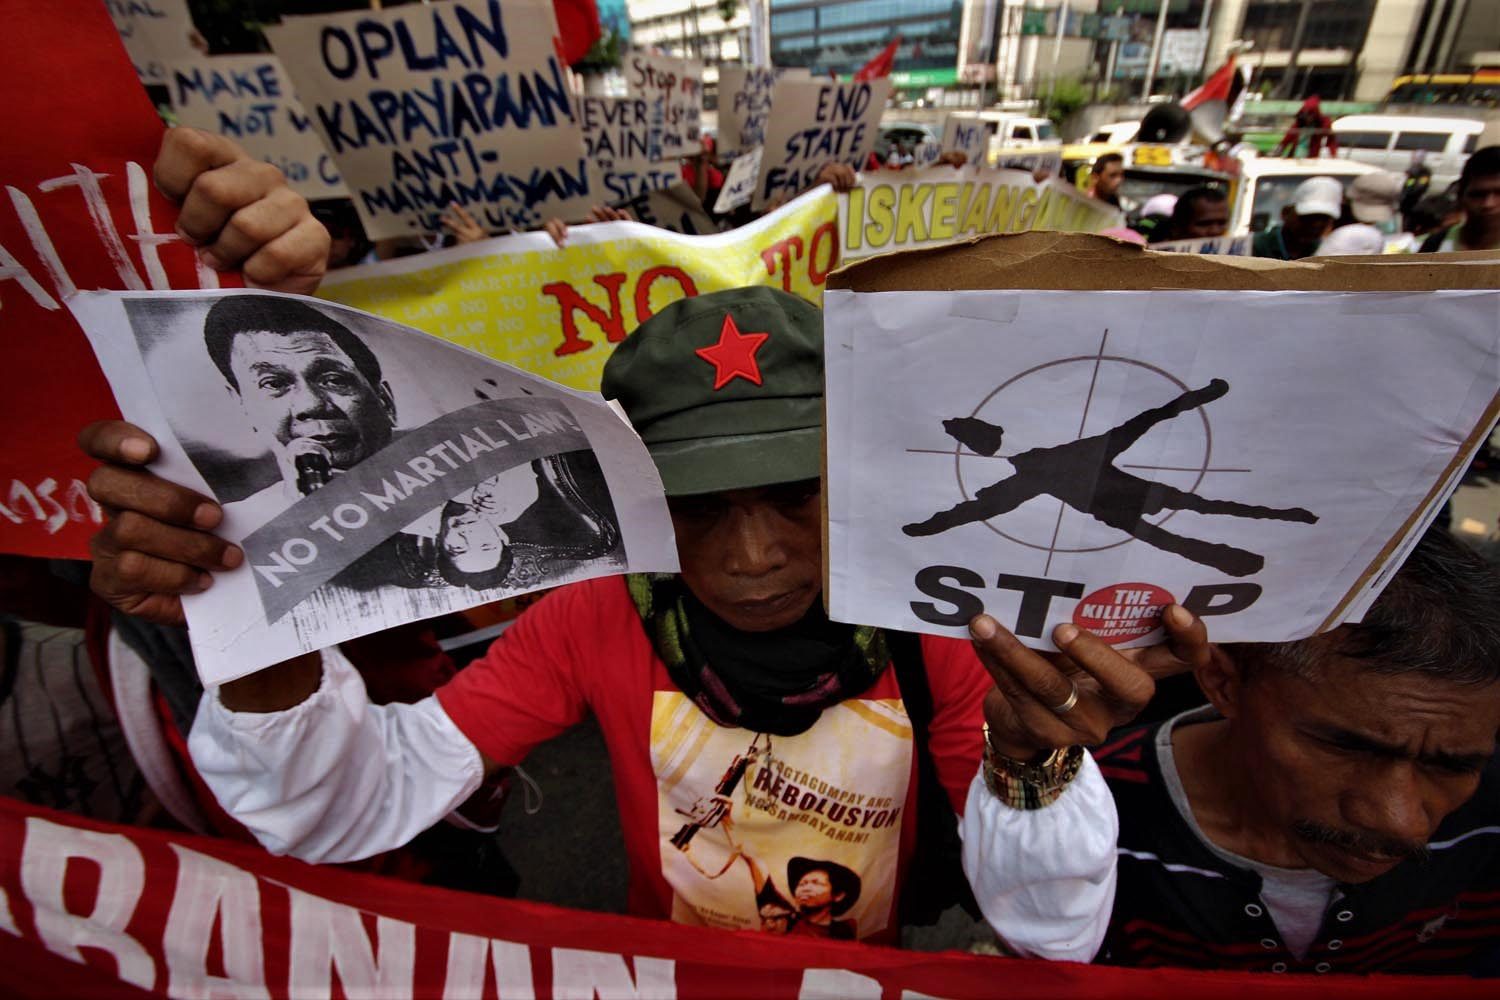 MAPS: Protest activities on September 21, Martial Law anniversary